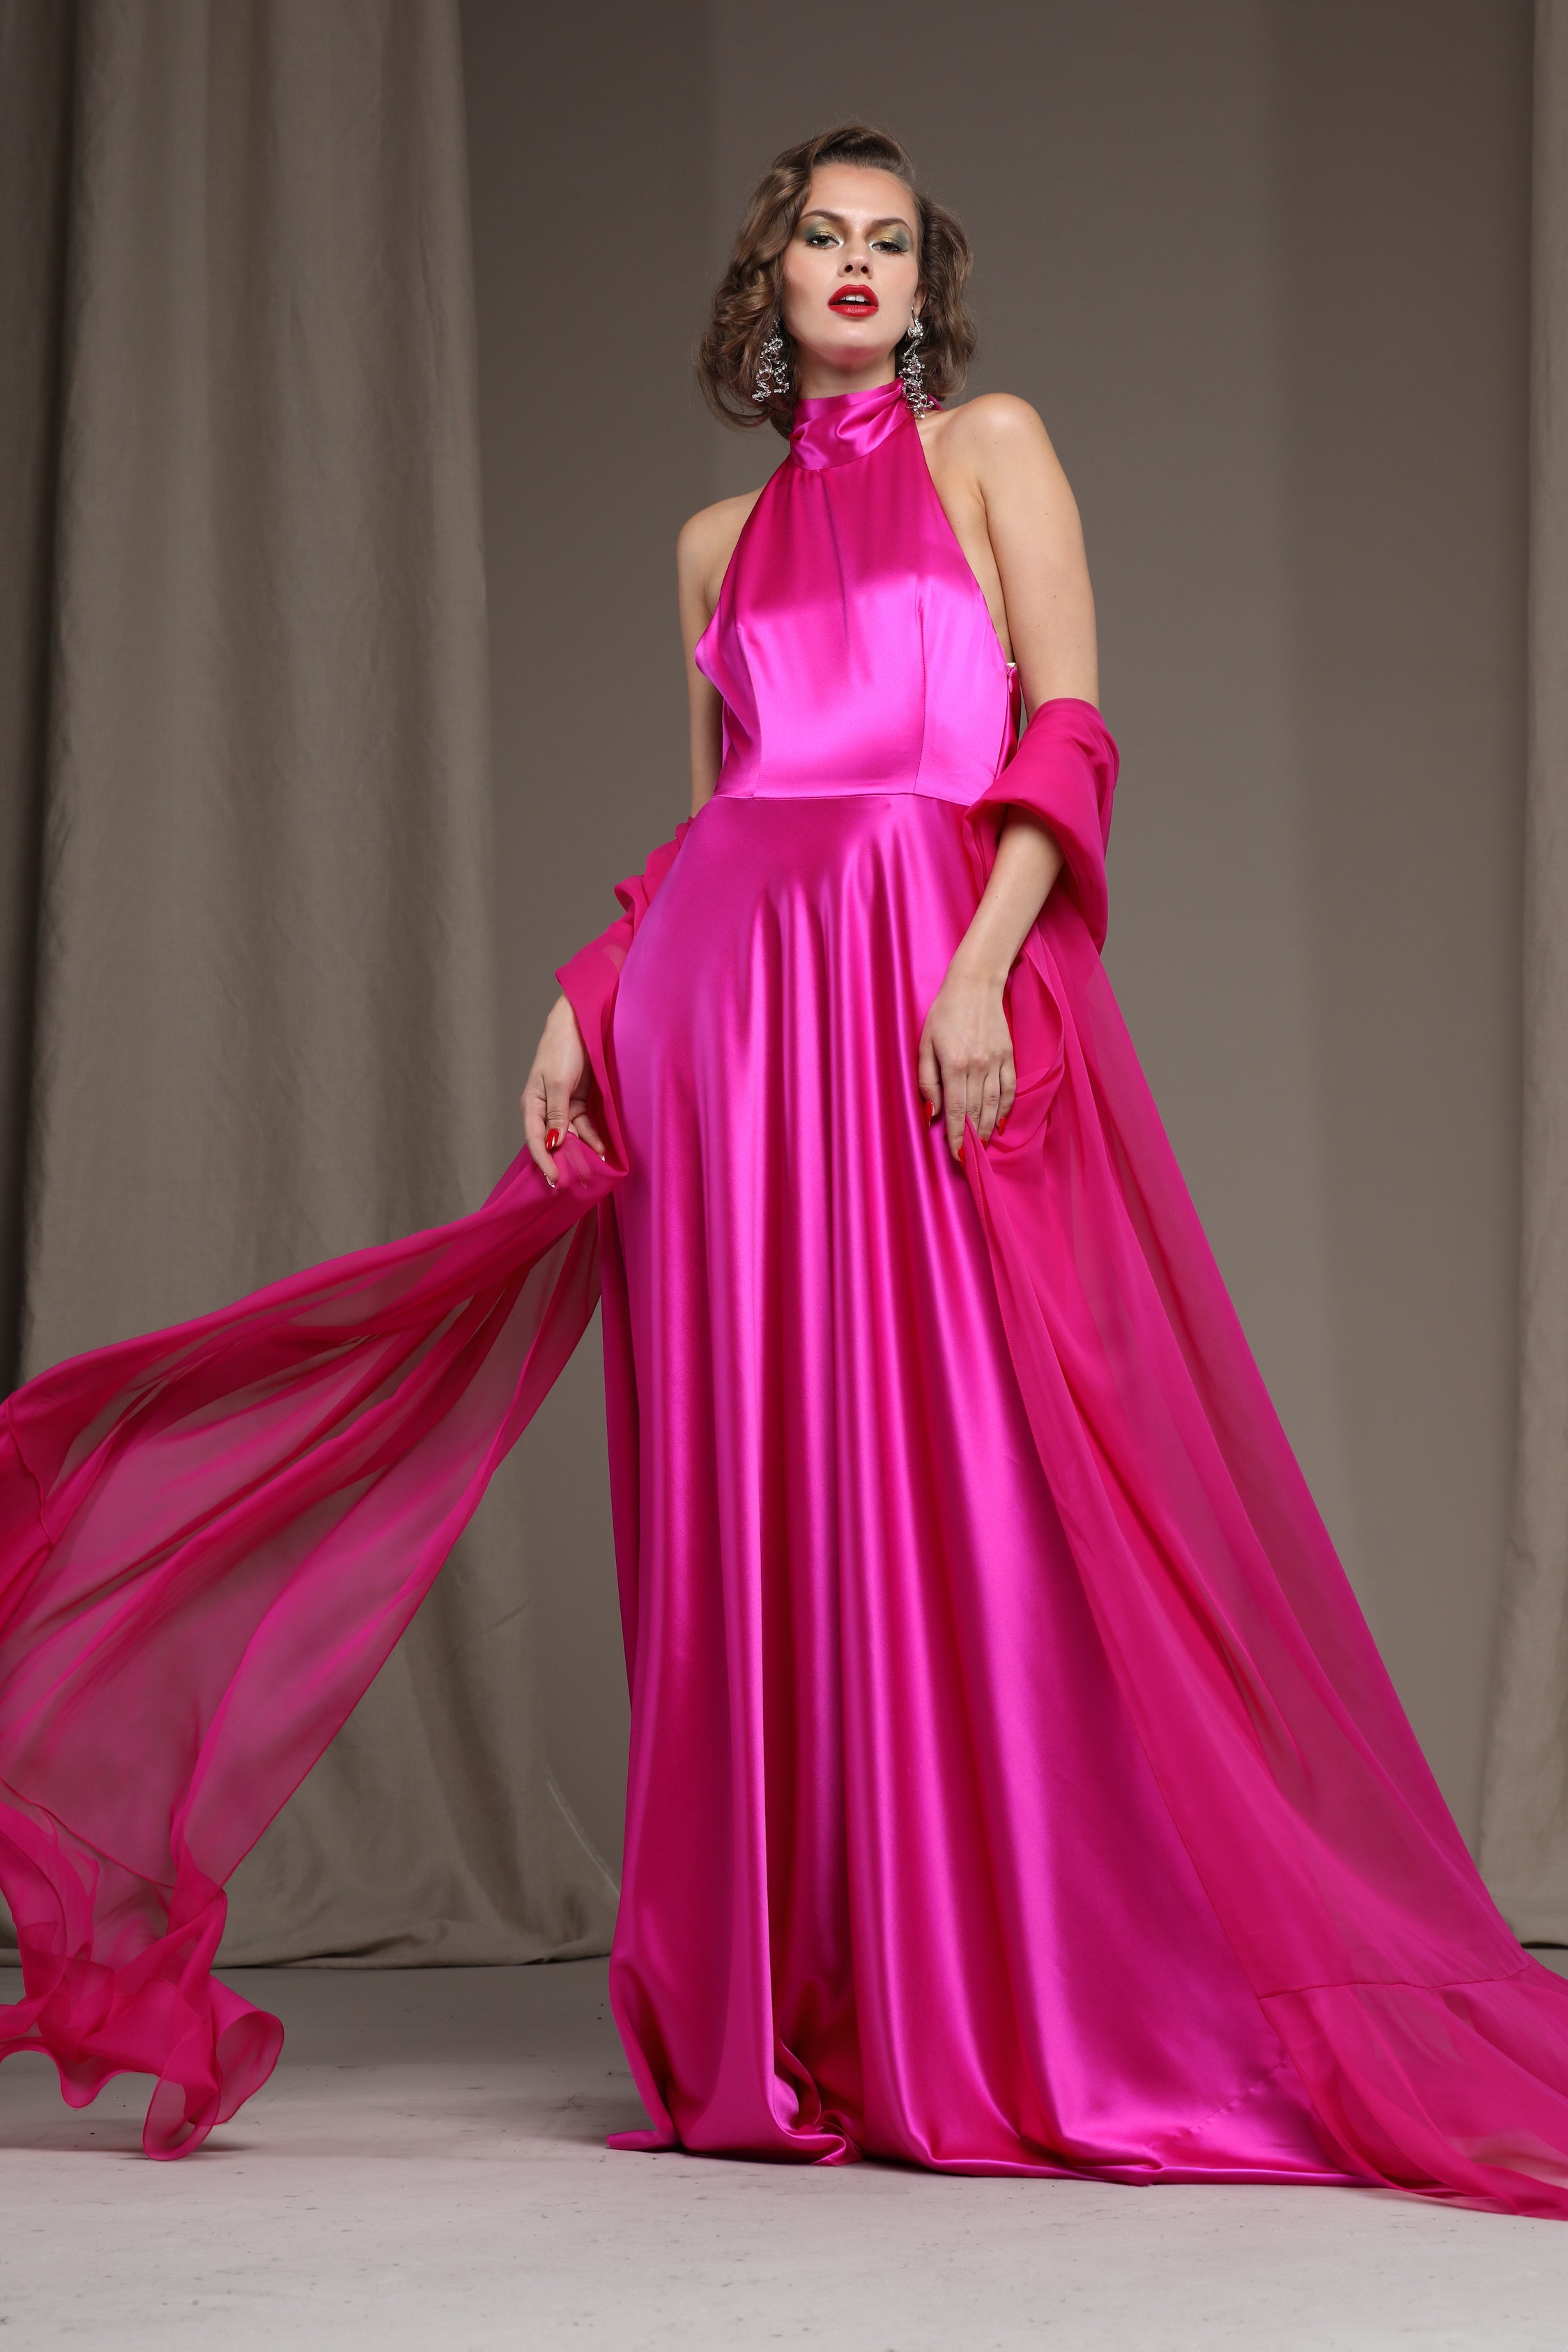 Beautiful Plain Attractive Pink Silk Gown Long Dress Bollywood Designer New  Gown | eBay